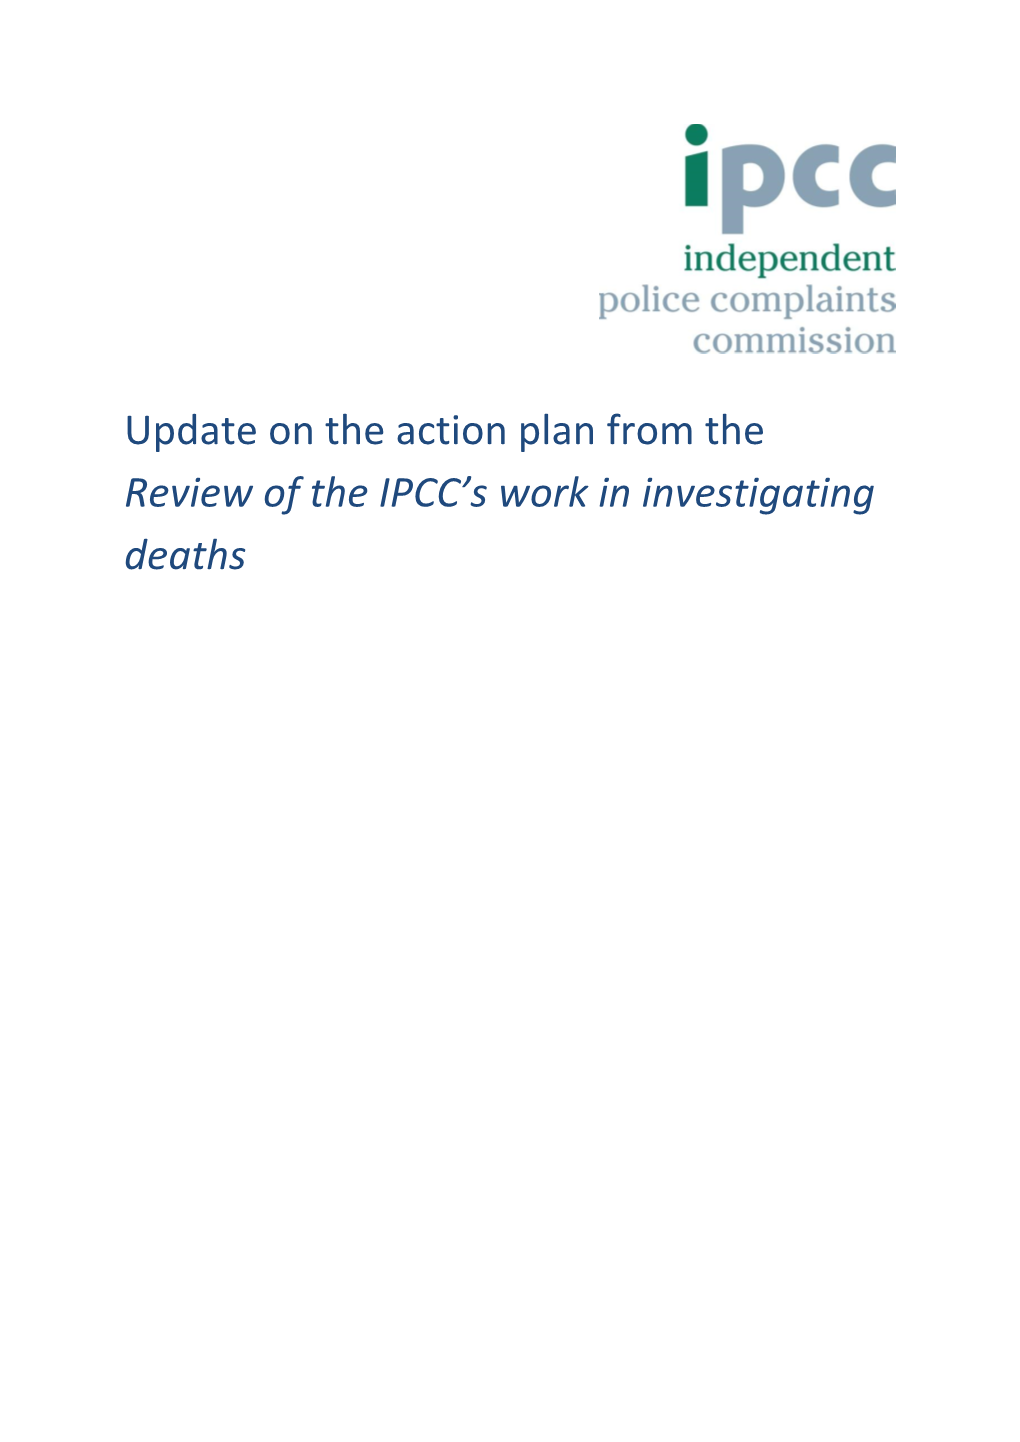 Update on the Action Plan from the Review of the IPCC's Work In